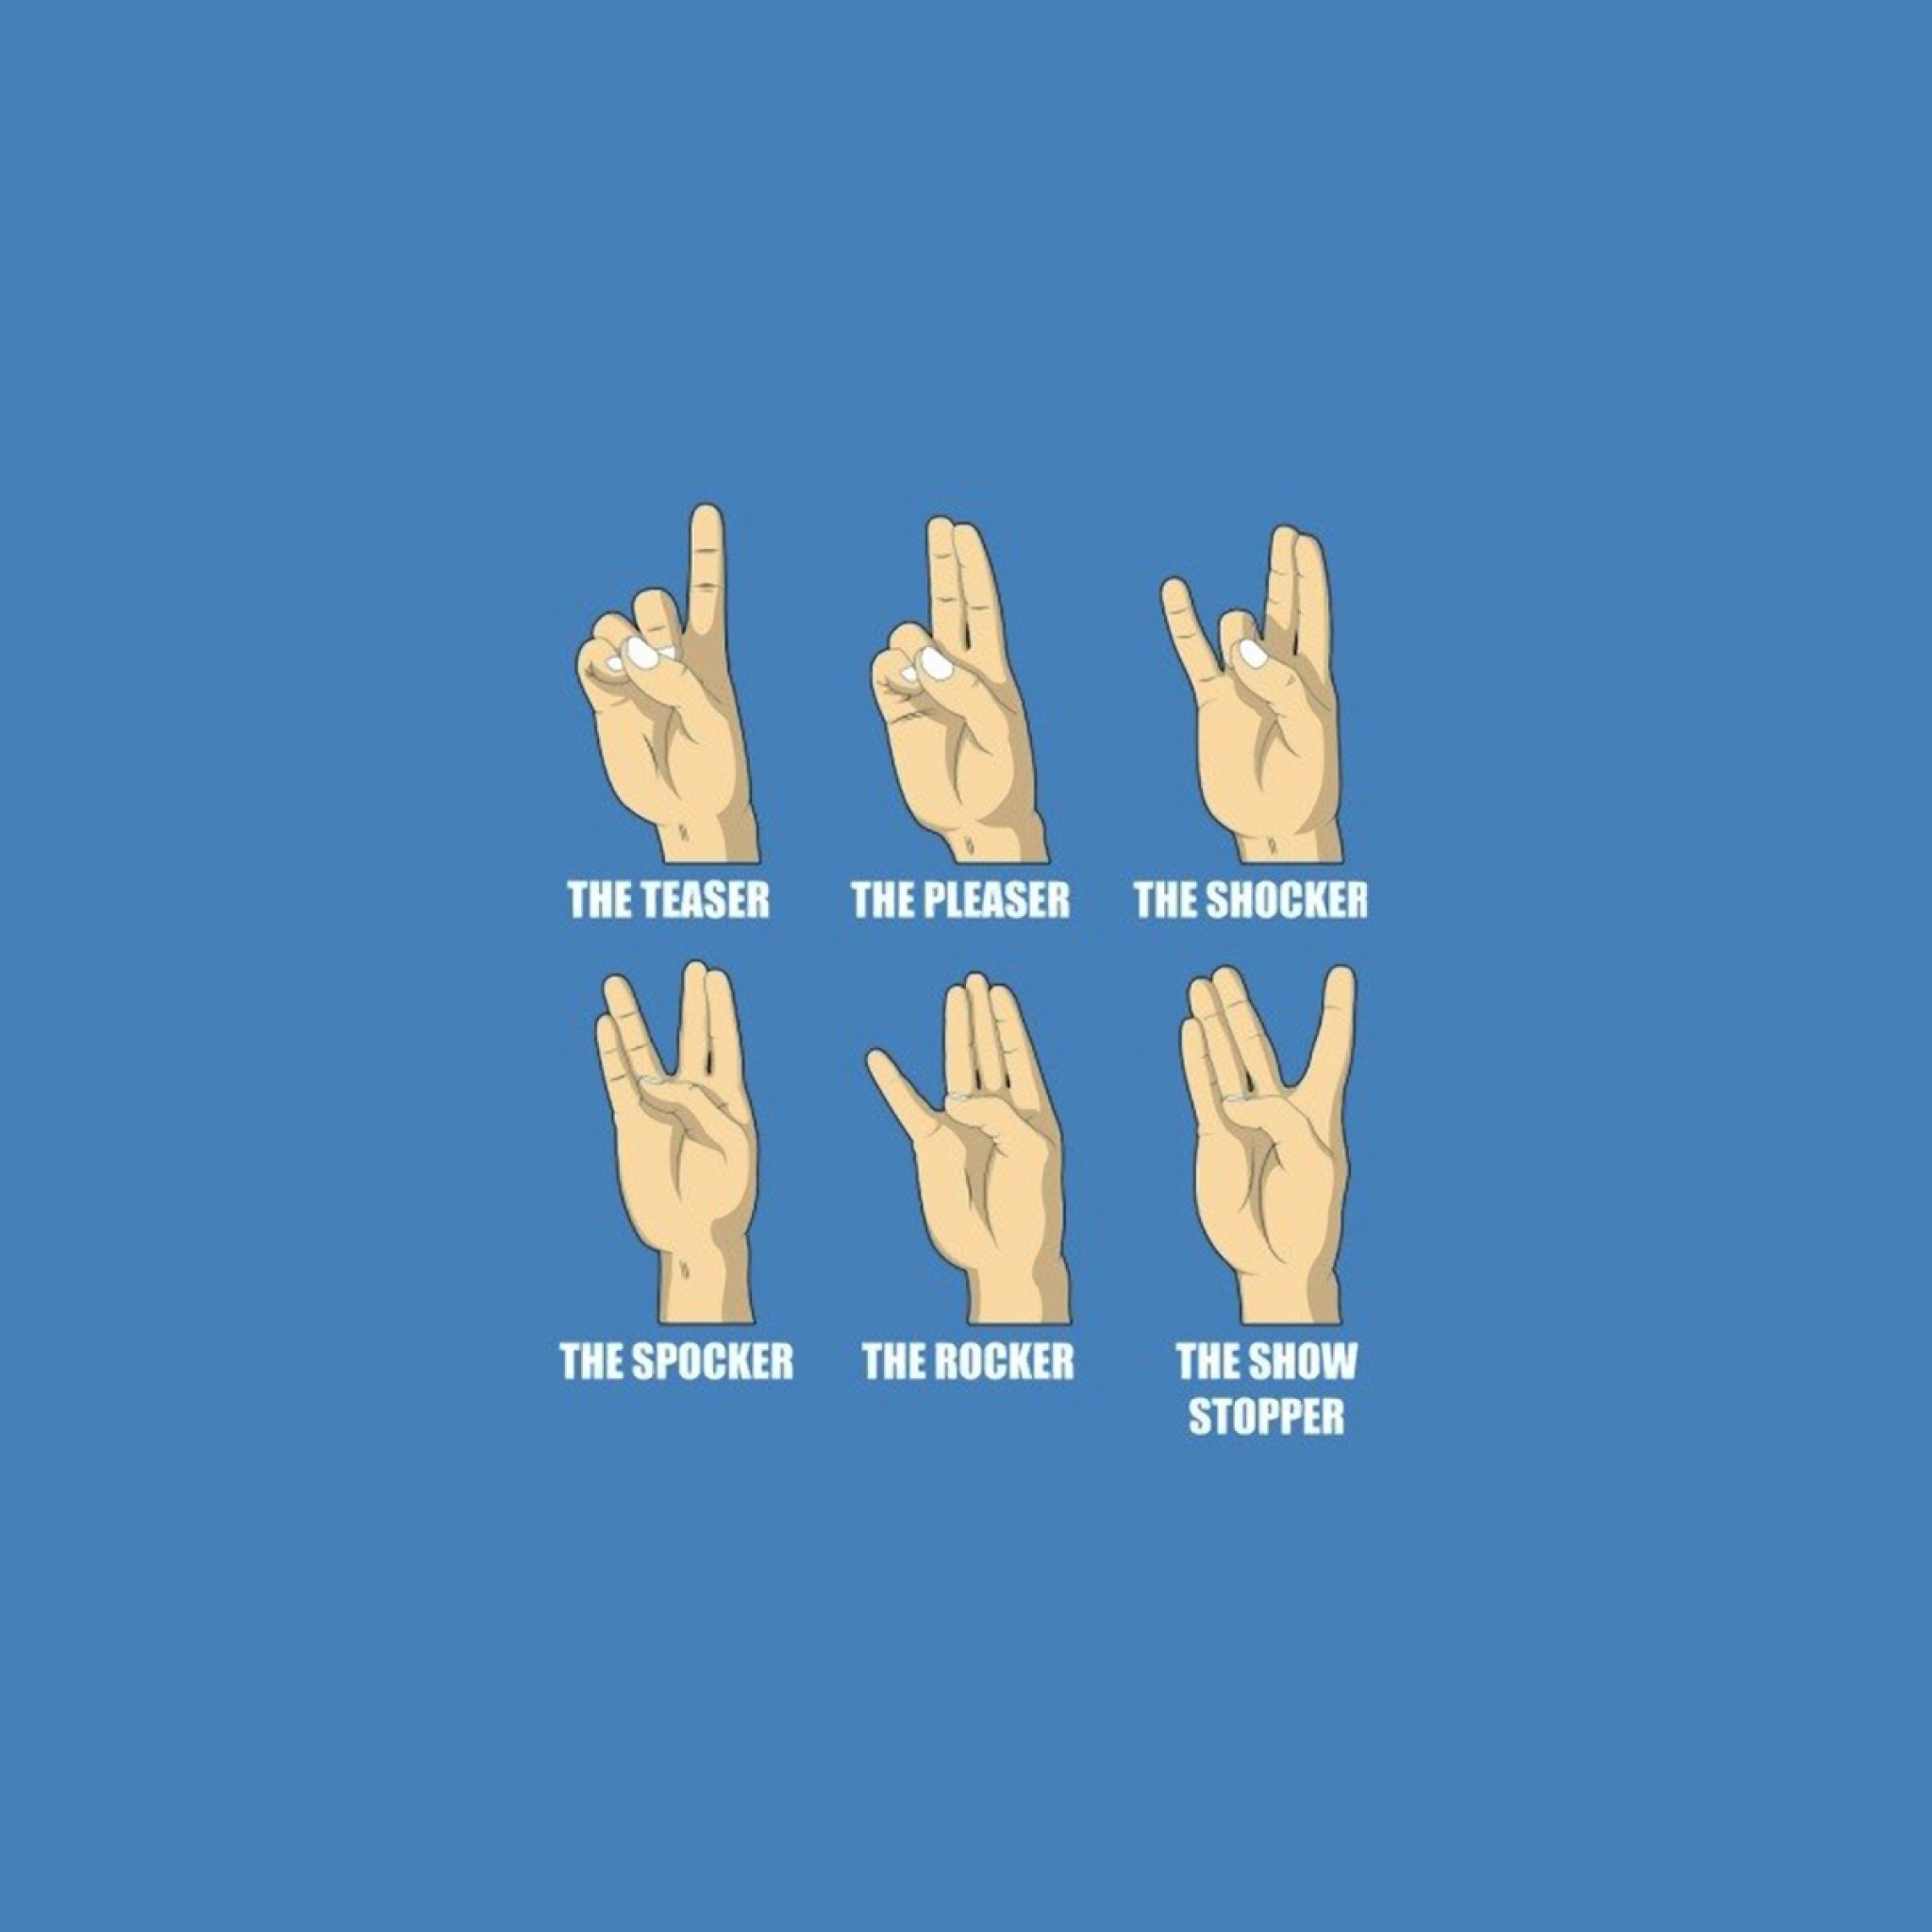 funny ipad wallpapers,finger,hand,sign language,beige,glove